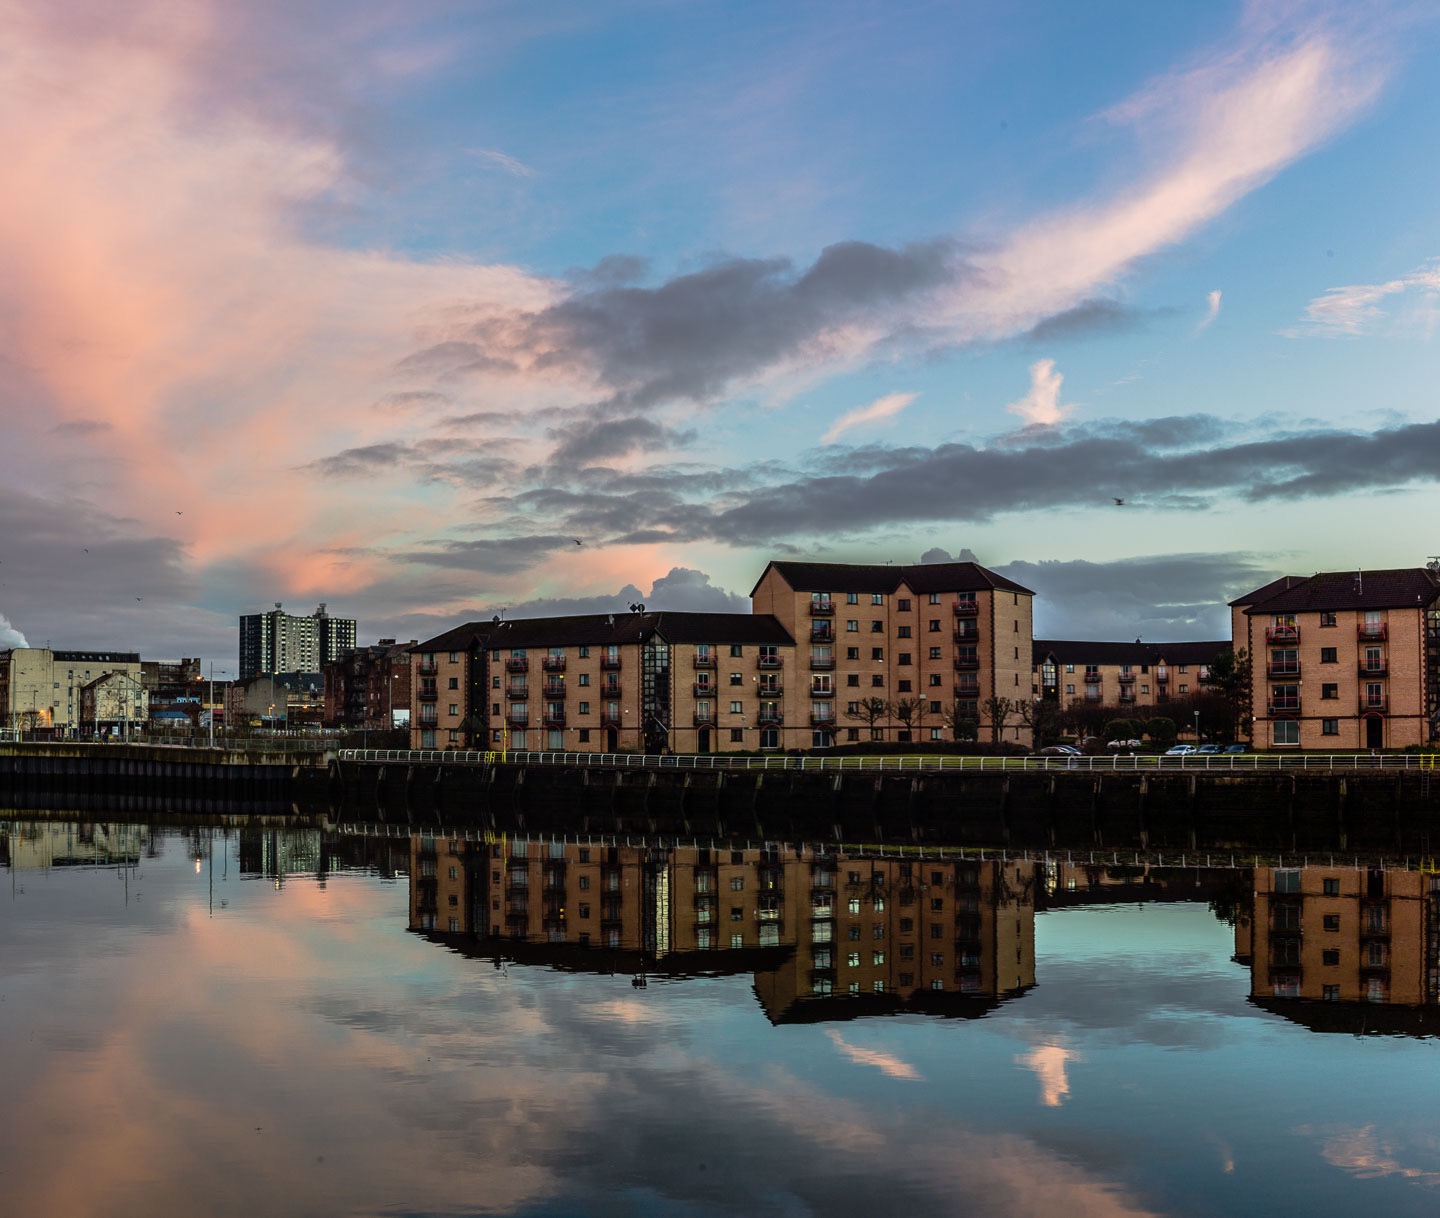 RIVERVIEW GARDENS
A fine sunset glow lights the sky over another of Glasgow's quayside regenerations